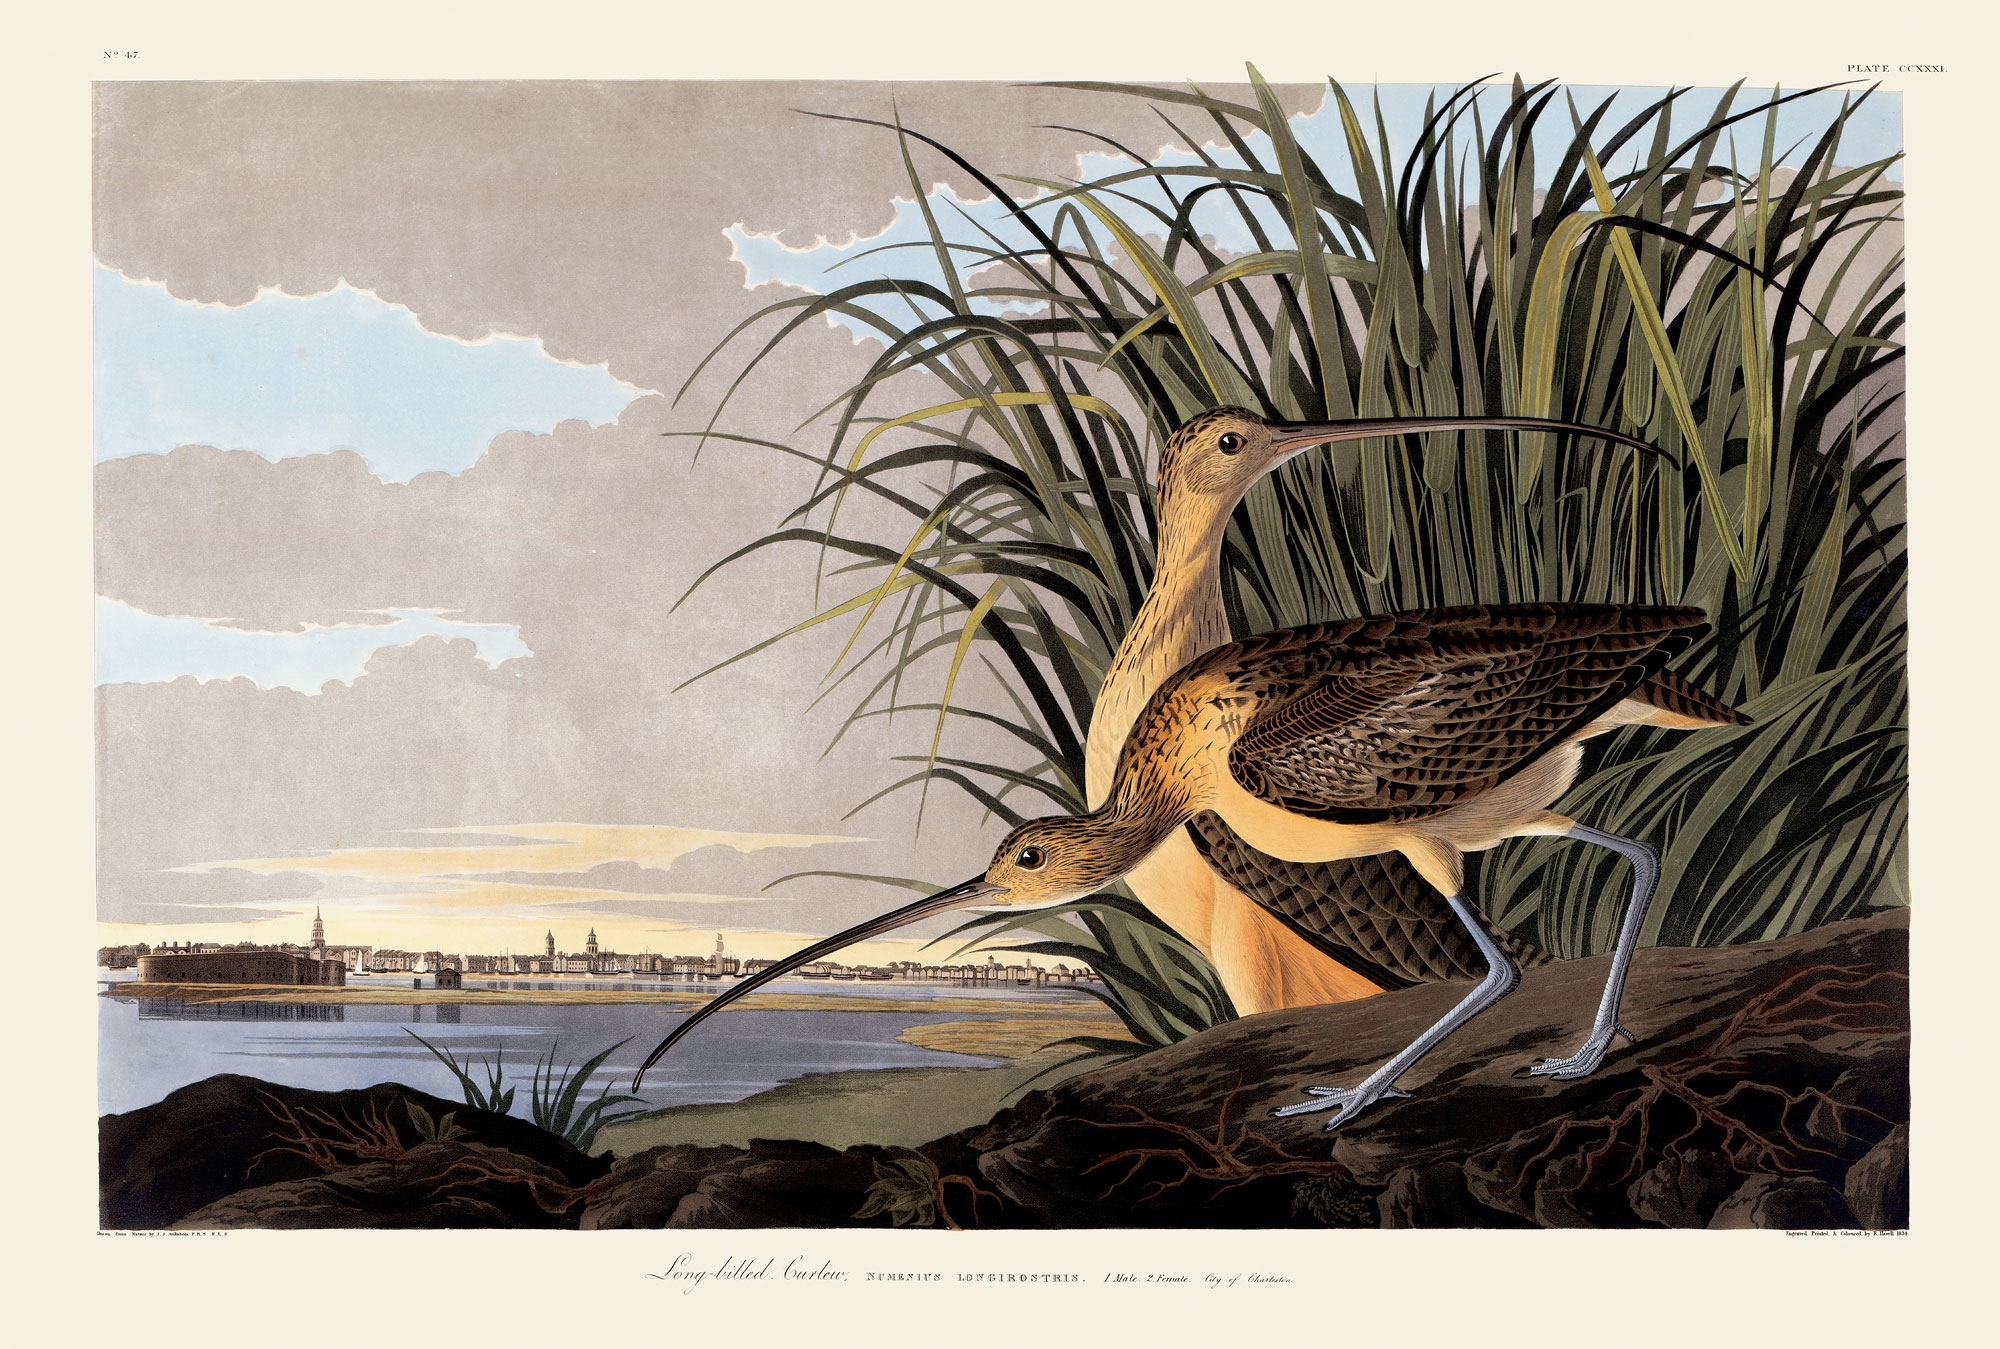 Two birds with very long, thin beaks poke around at the edge of the water. They’re a light yellow-tan color on the underside, with dark brown patterned wings folded on their backs. They have lanky, blue legs. Green reeds are directly behind the birds, and a small city skyline is off in the far distance.